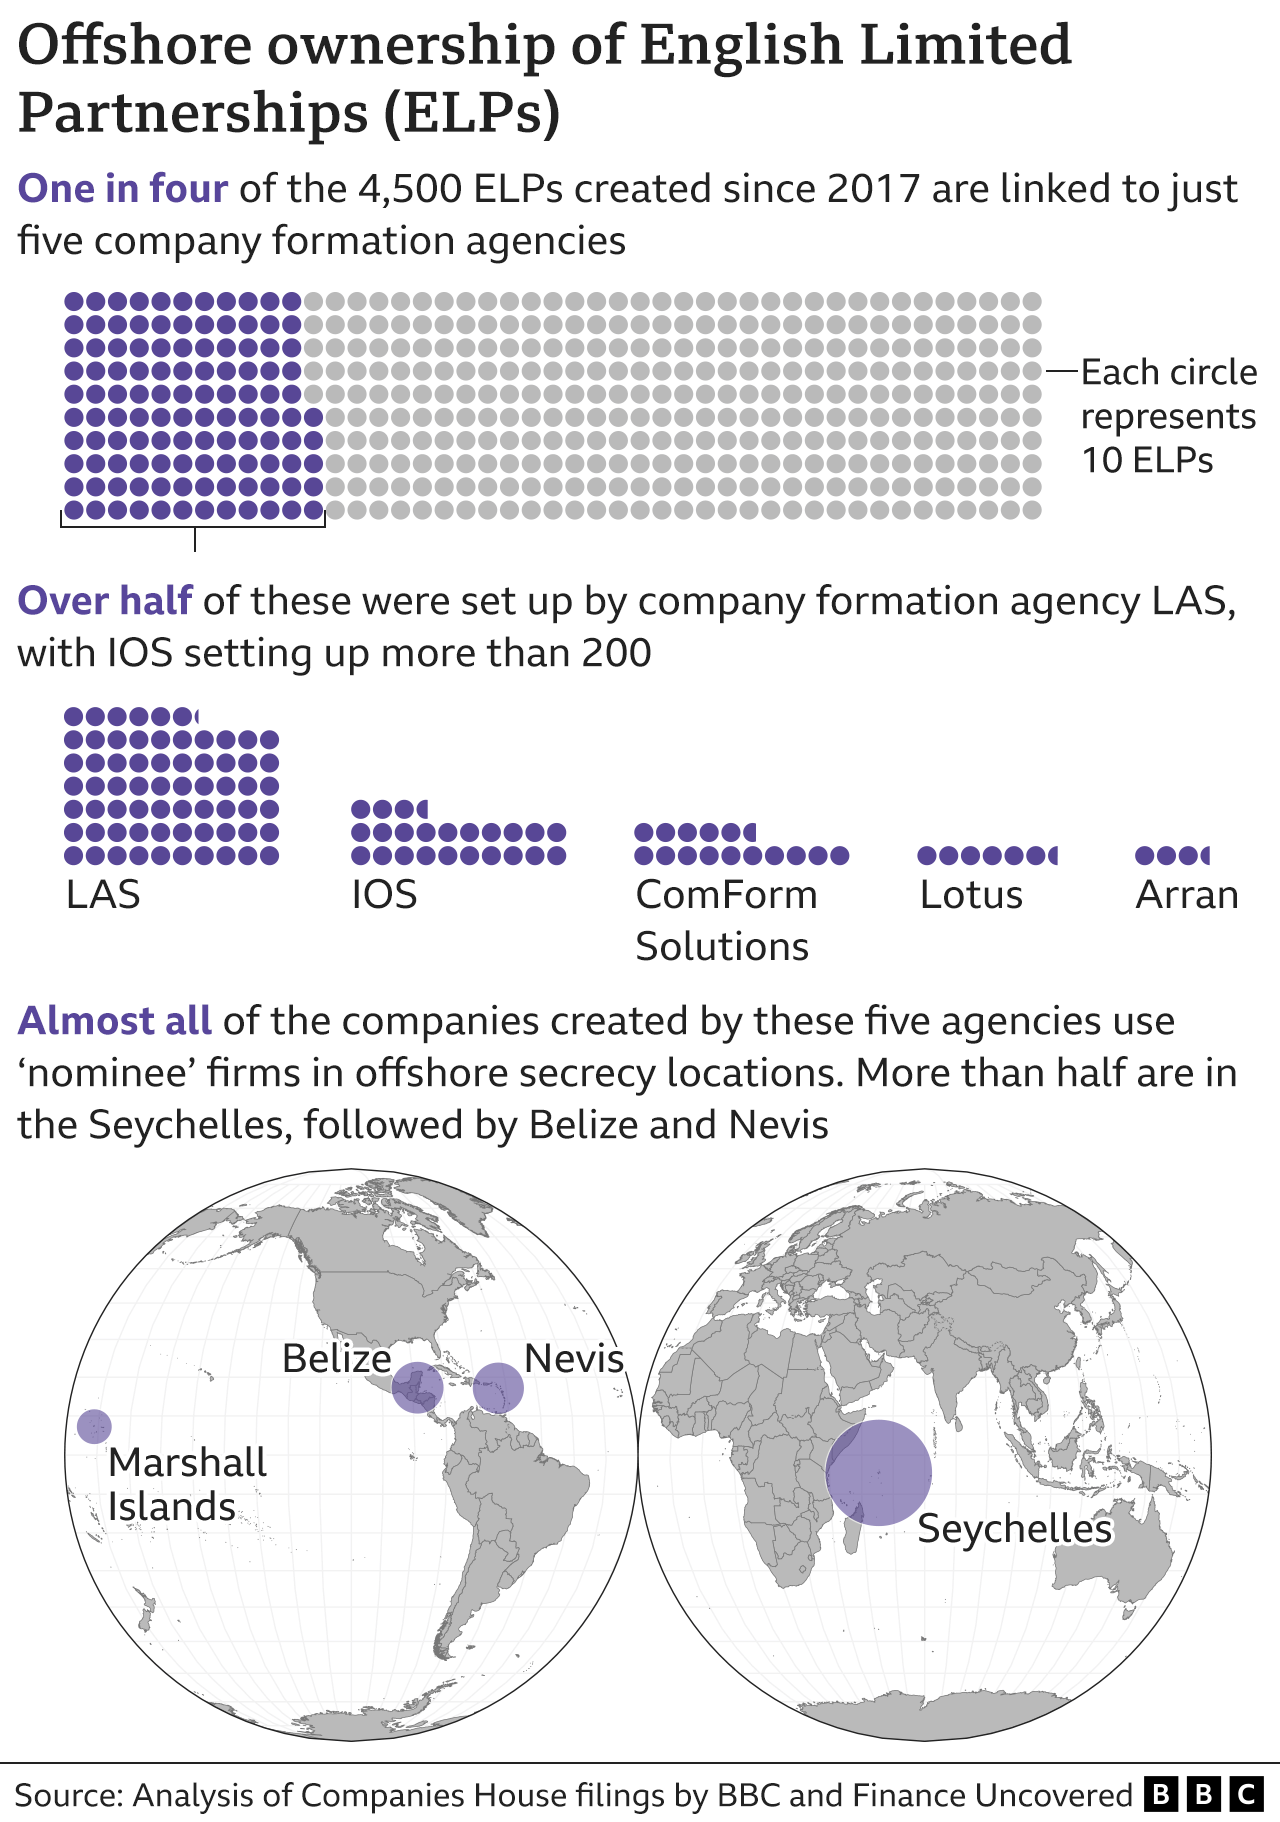 Graphic on the offshore ownership of English Limited Partnerships (ELPs). The graphic shows that one in four ELPs created since 2017 were set up by just five company formation agencies. Over half of these were set up by the formation agency LAS, with IOS setting up more than 200. Almost all of the companies created by these five agencies use 'nominee' firms in offshore secrecy locations, primarily the Seychelles followed by Belize and Nevis